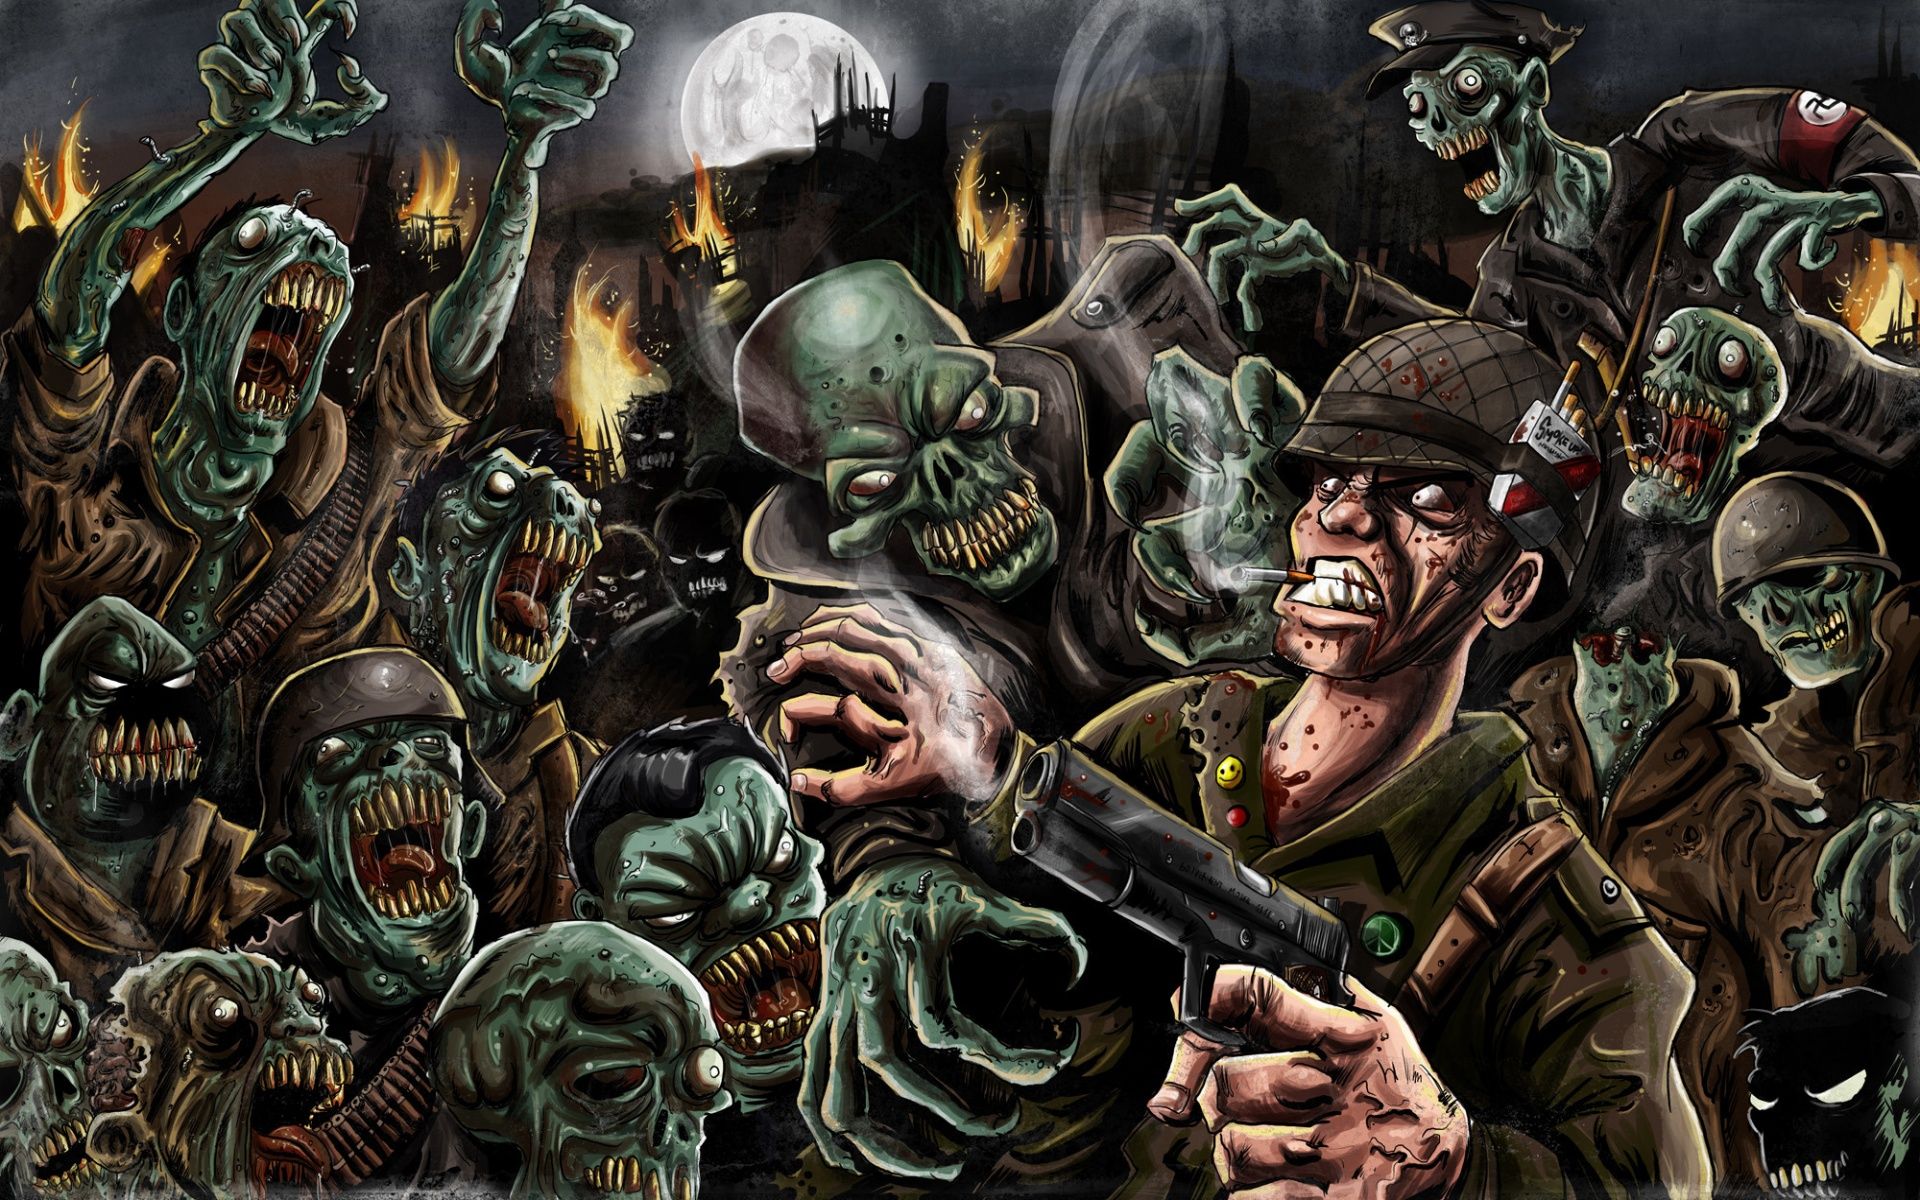 Dark zombies blood horror monsters creatures scary soldiers